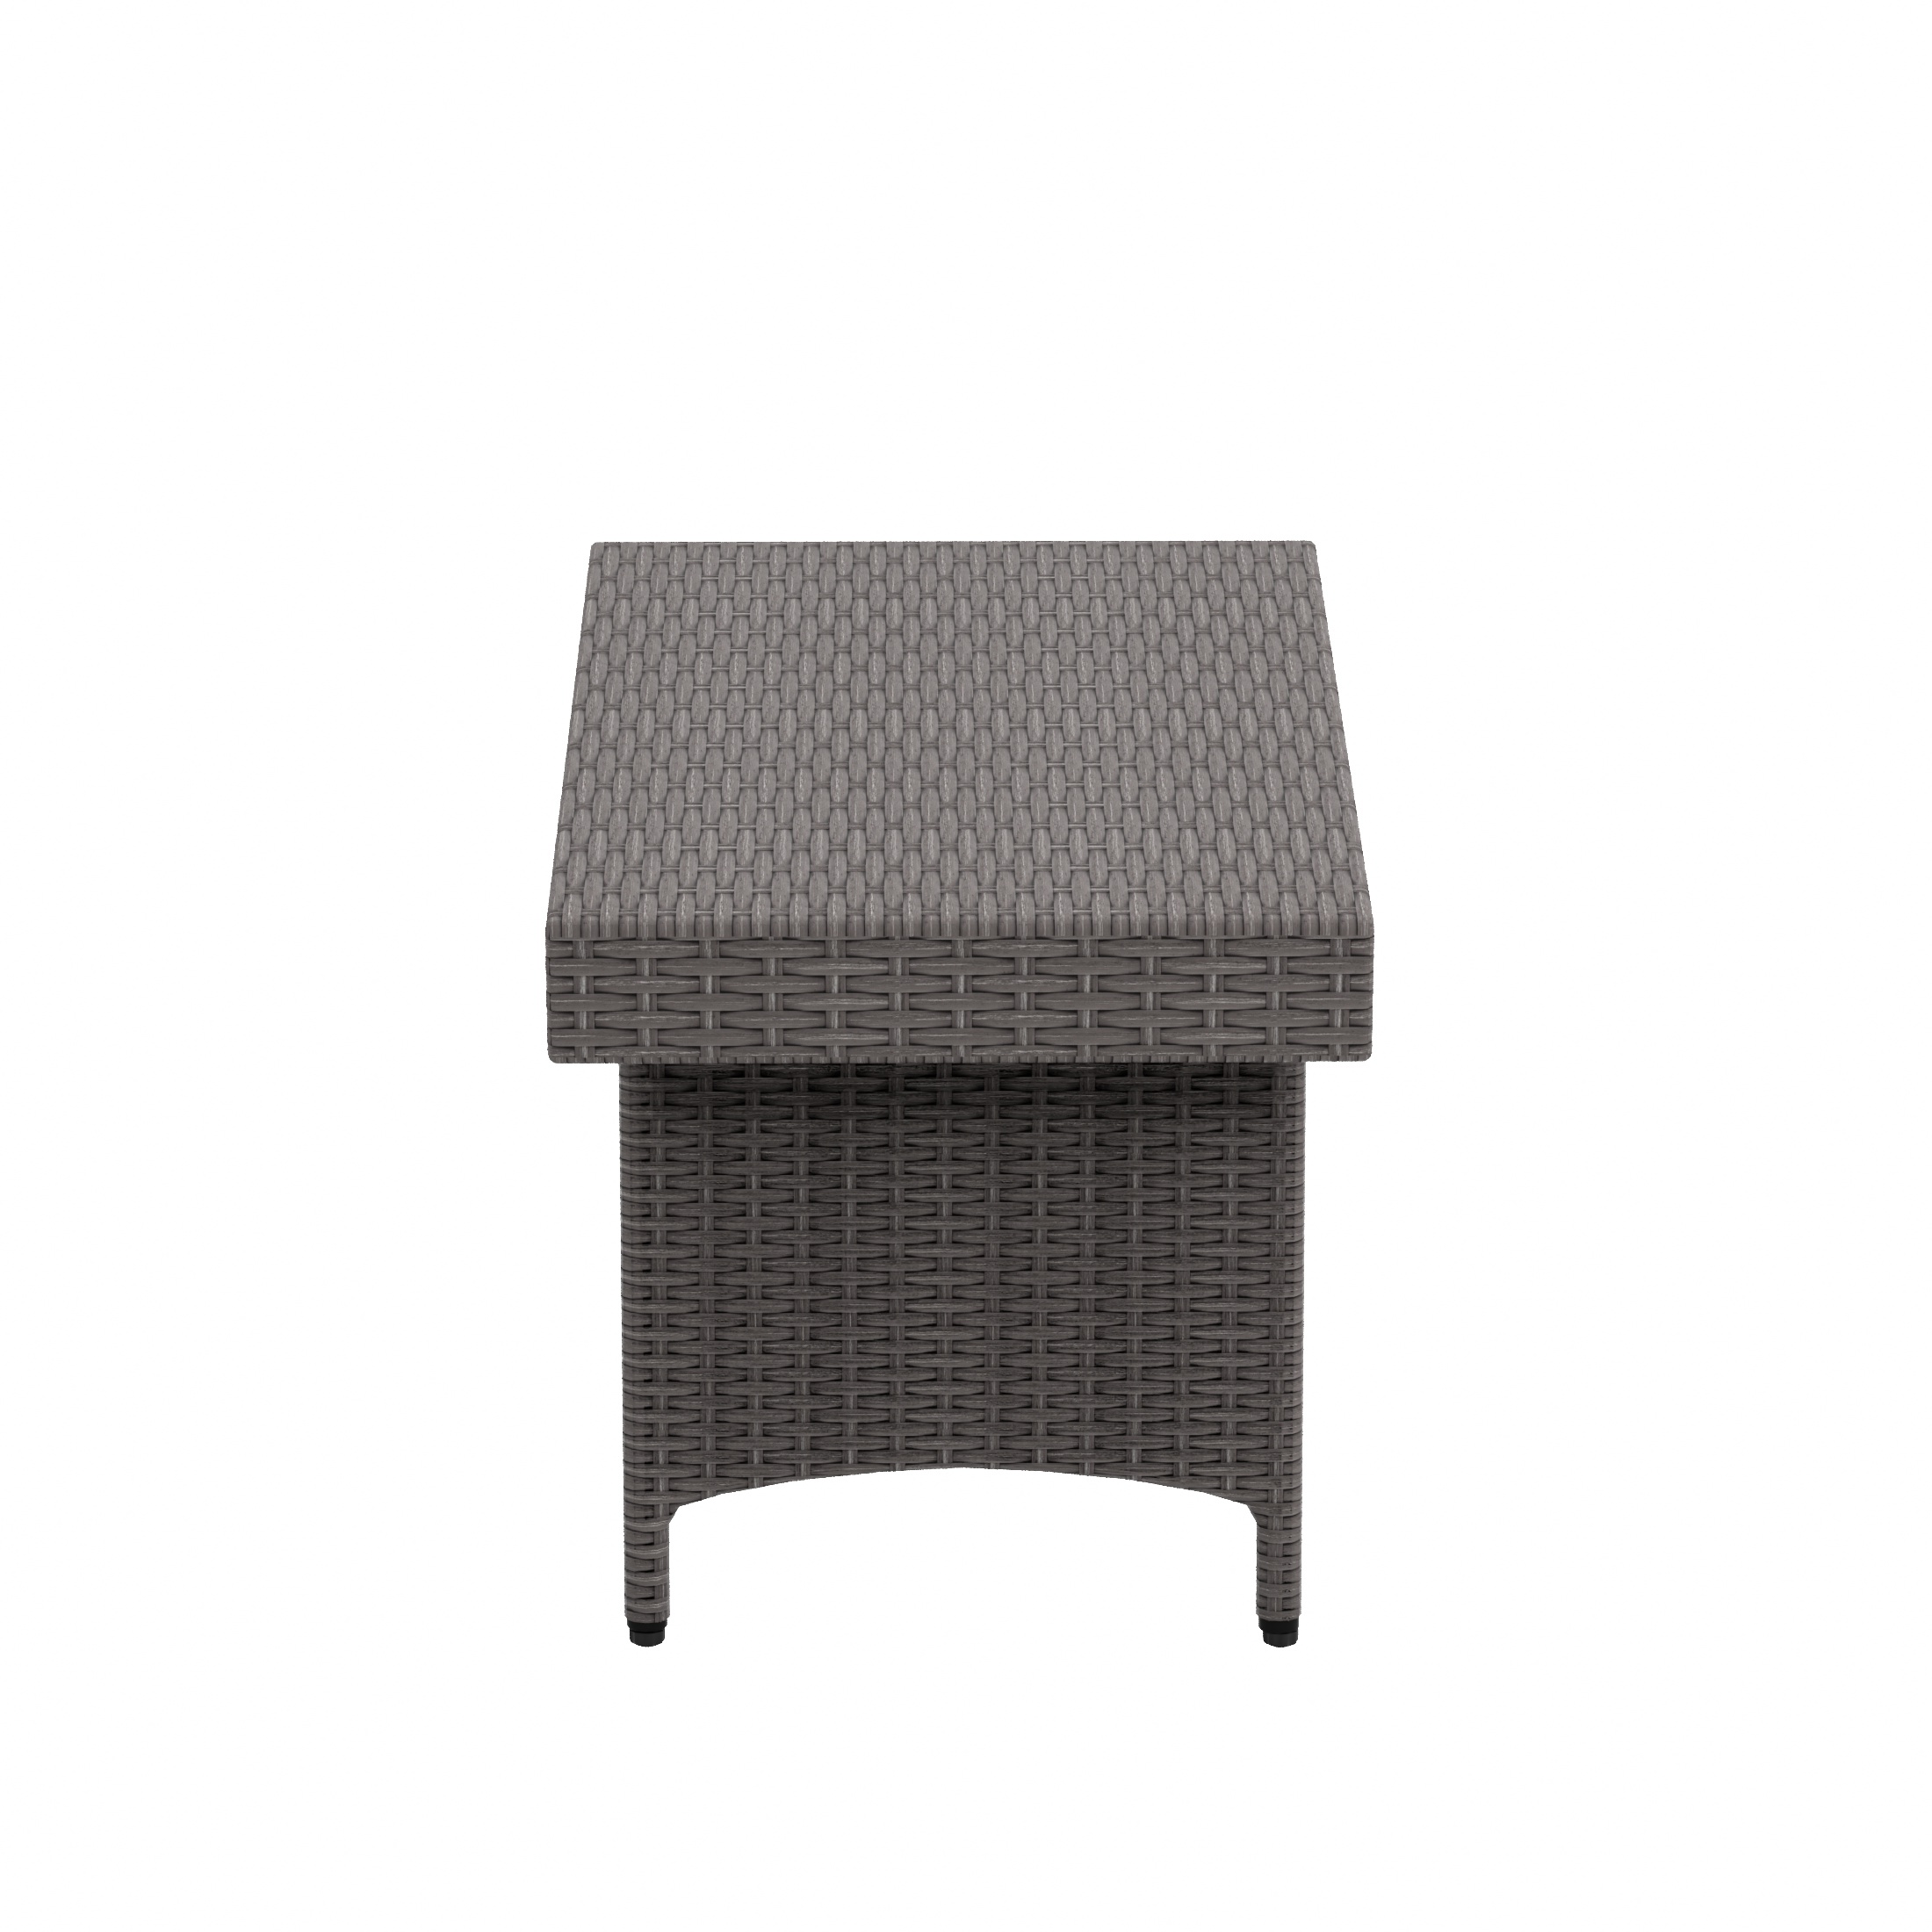 WestinTrends Coastal Outdoor Folding Side Table, 23" x 15" All Weather PE Rattan Wicker Small Patio Table Portable Picnic Table, Gray - image 4 of 7